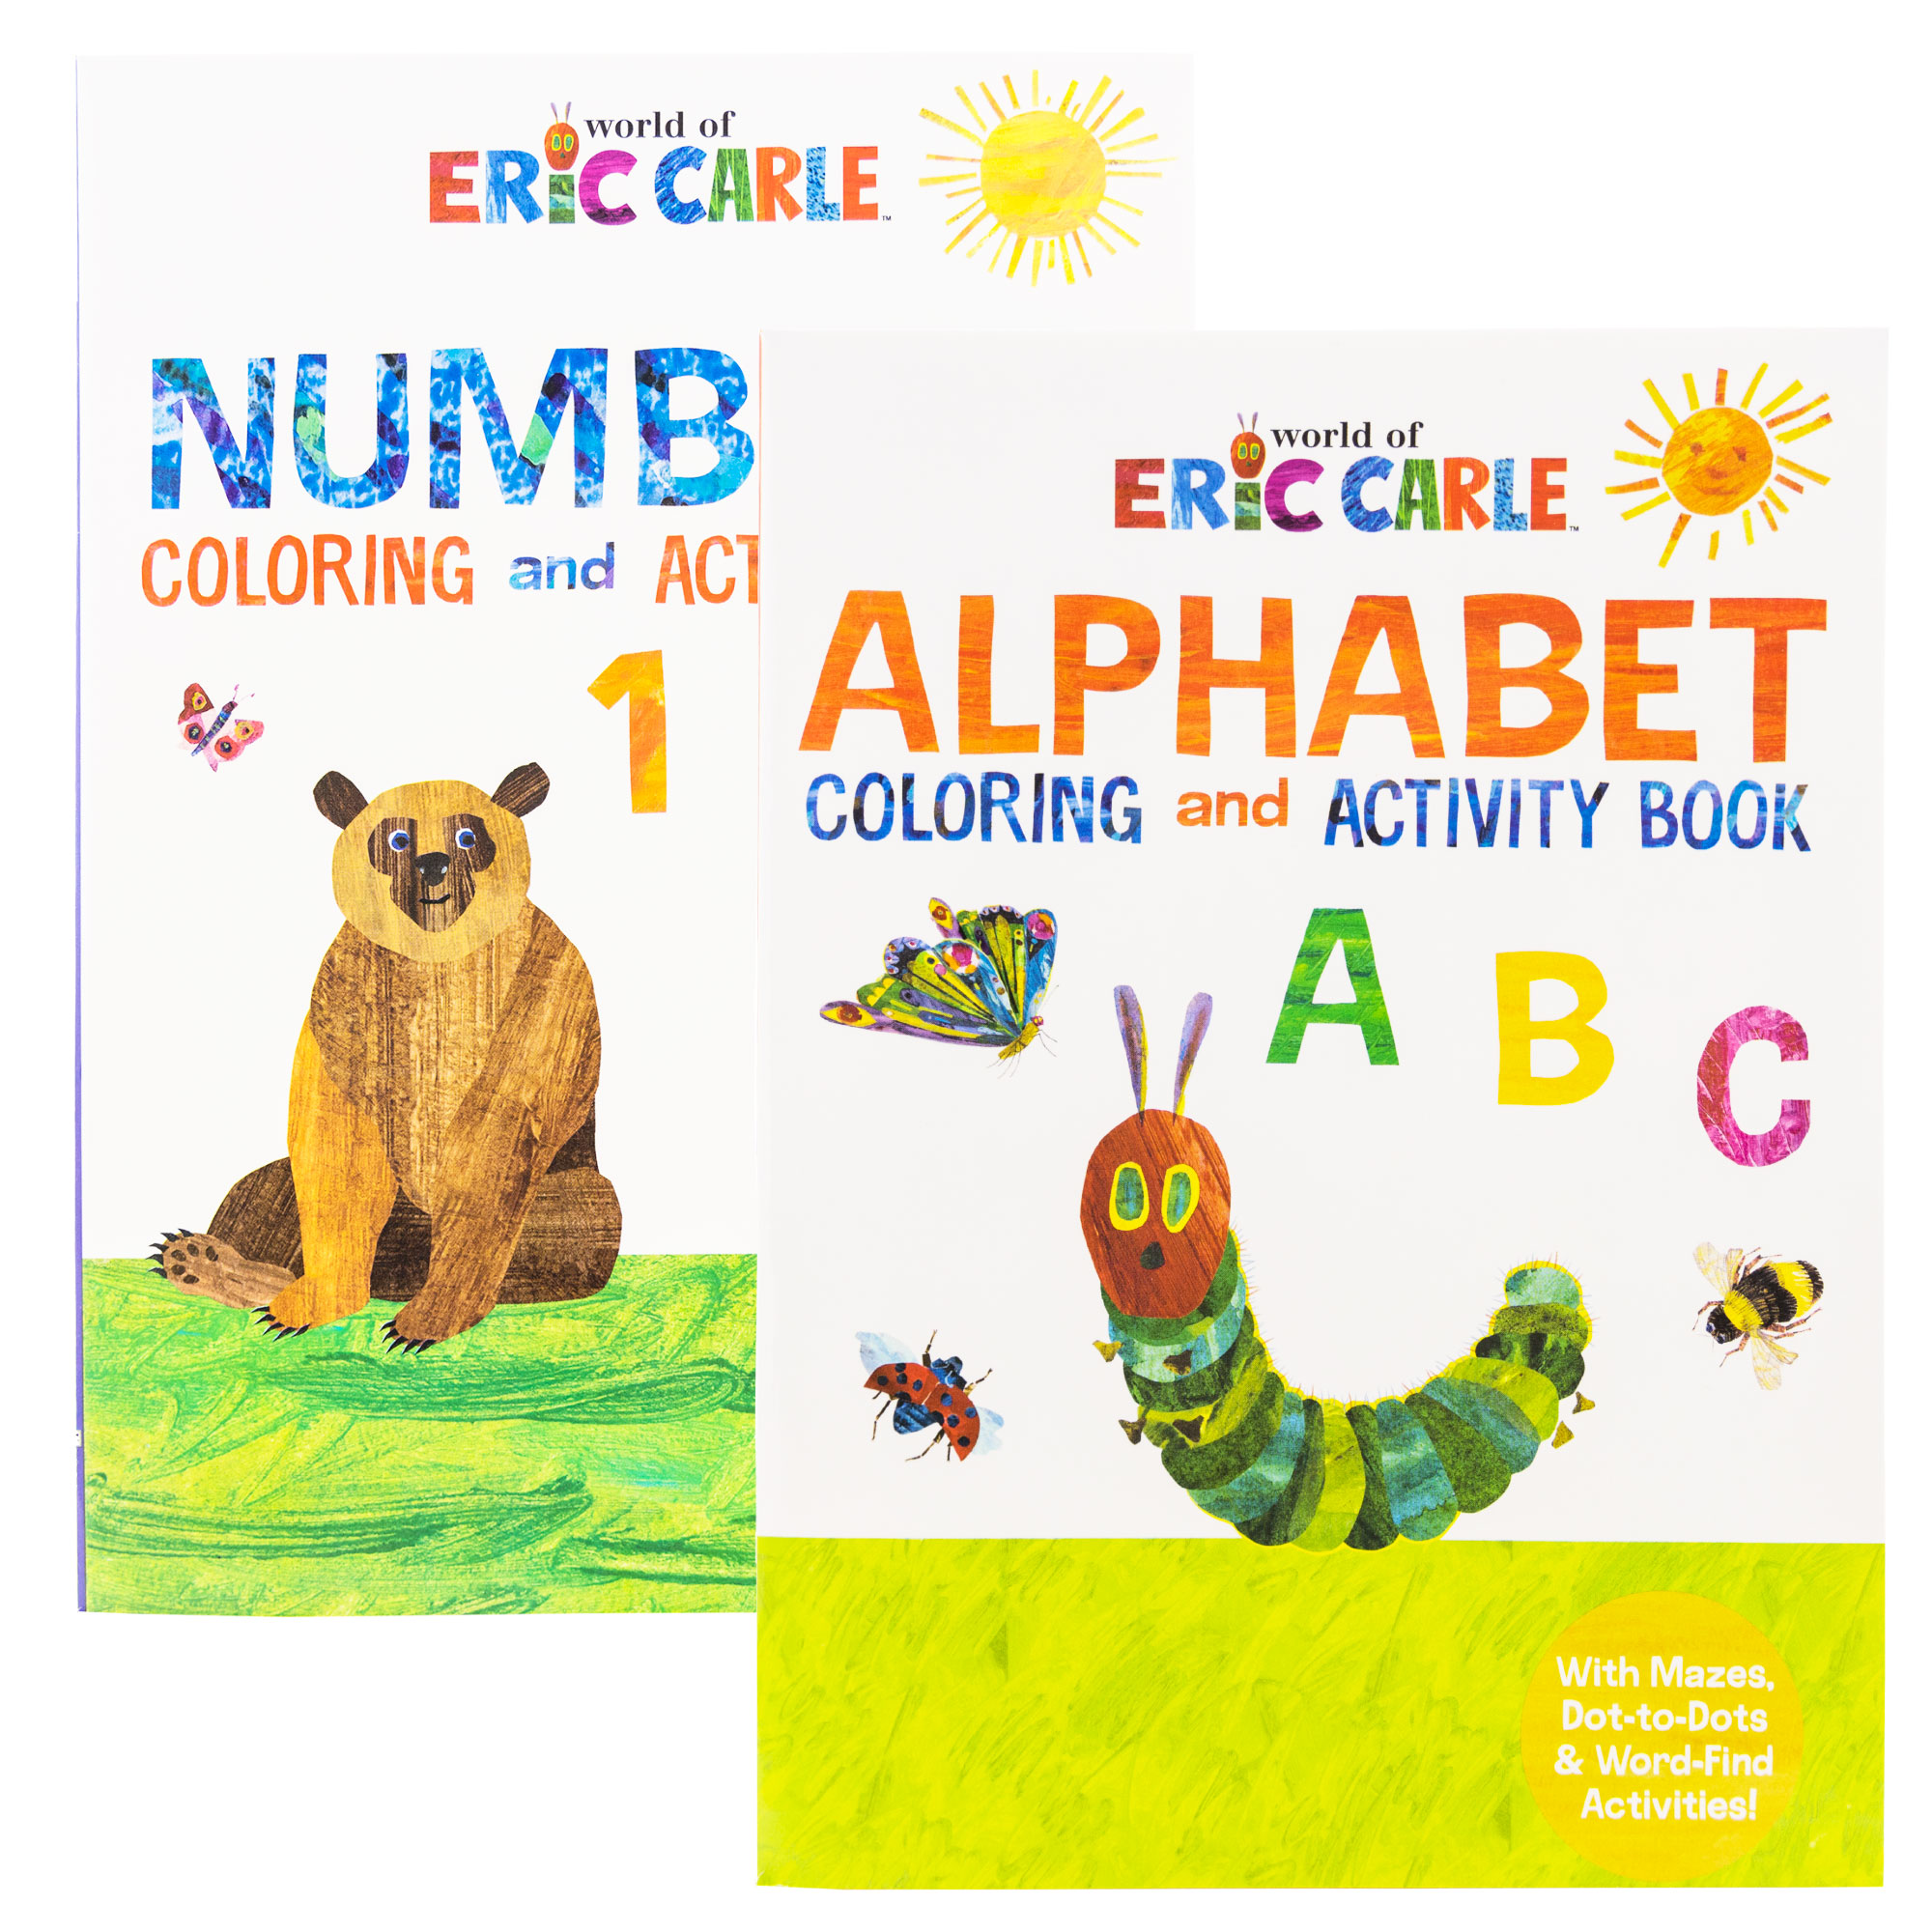 `ERIC CARLE Coloring & Activity Book